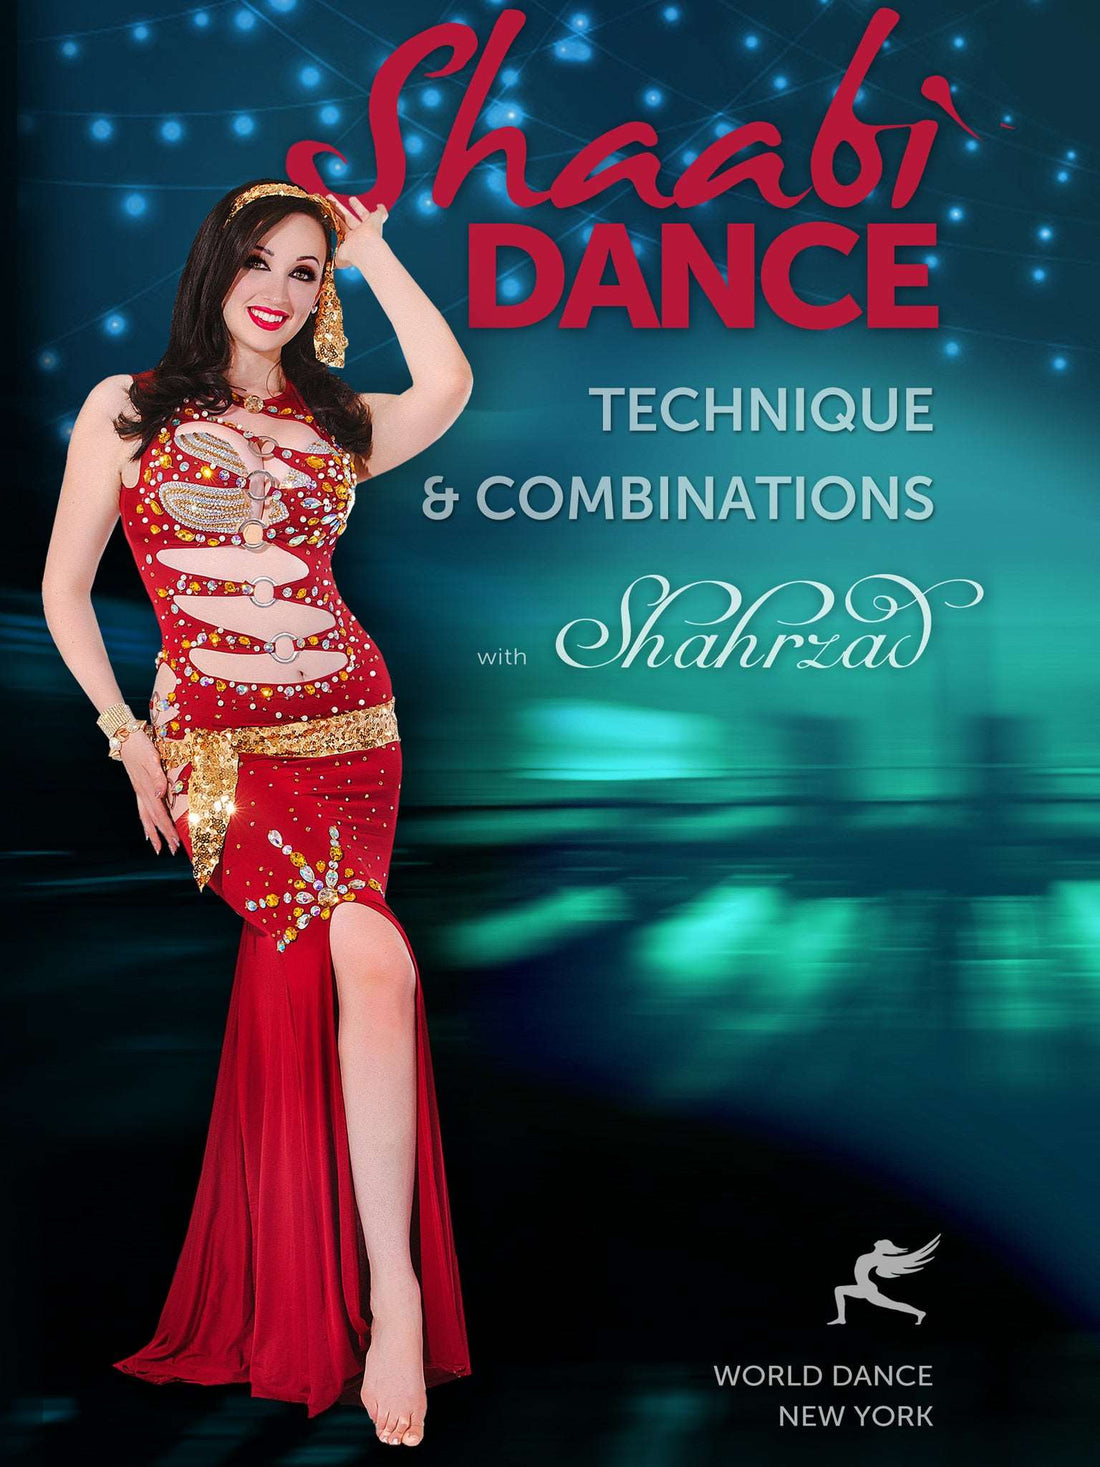 "Shaabi Dance Technique & Combinations" DVD with Shahrzad - World Dance New York